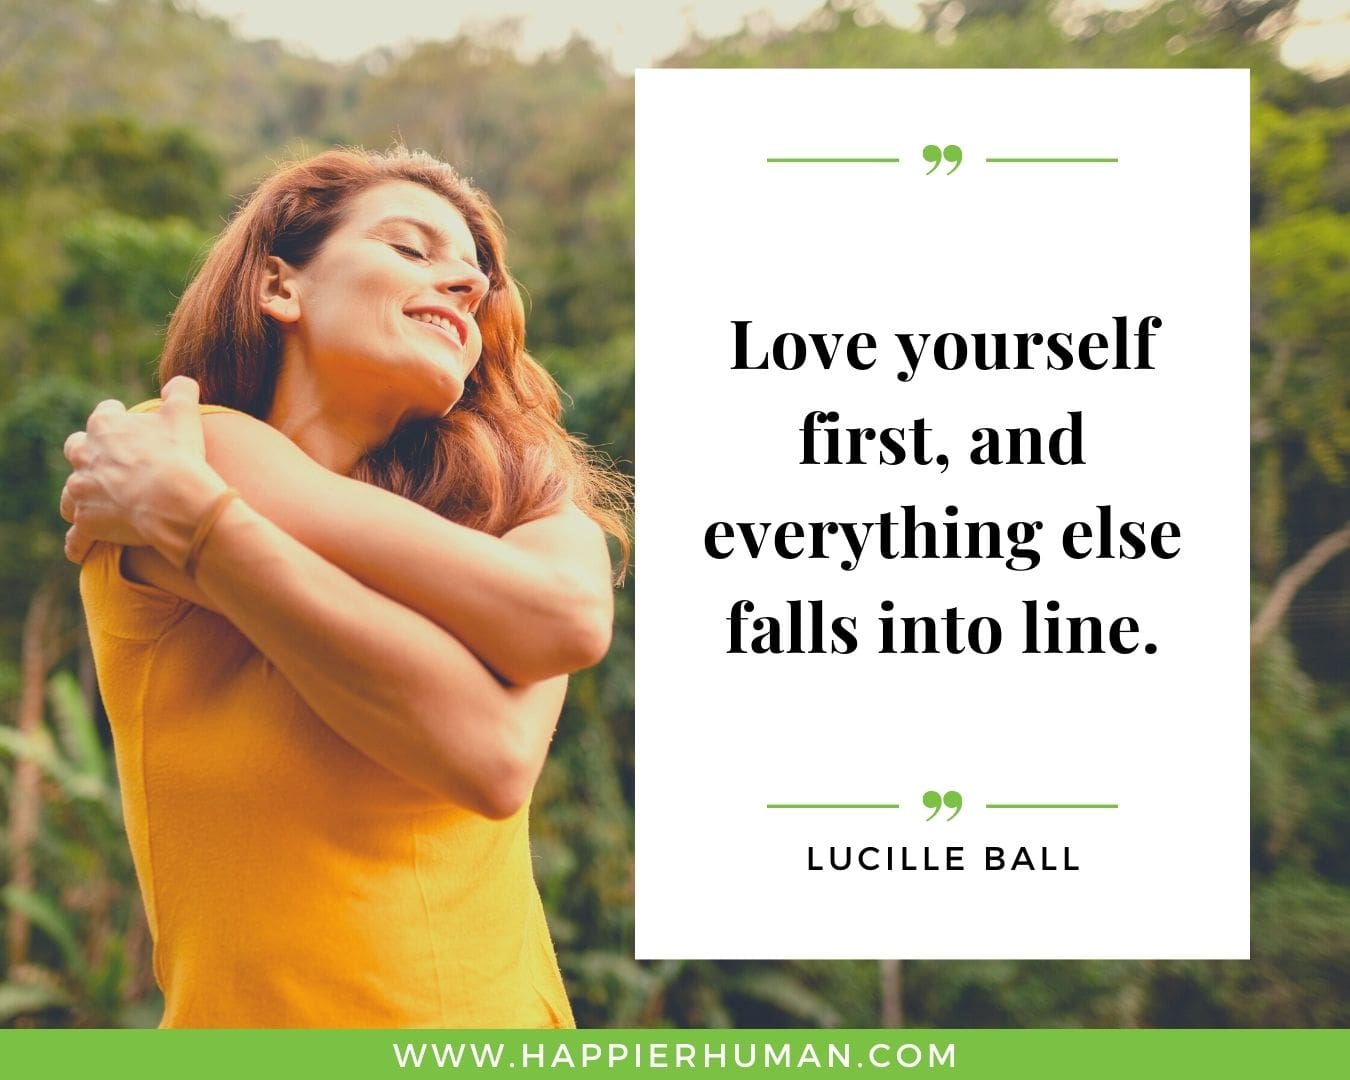 Haters Quotes - “Love yourself first, and everything else falls into line.” - Lucille Ball